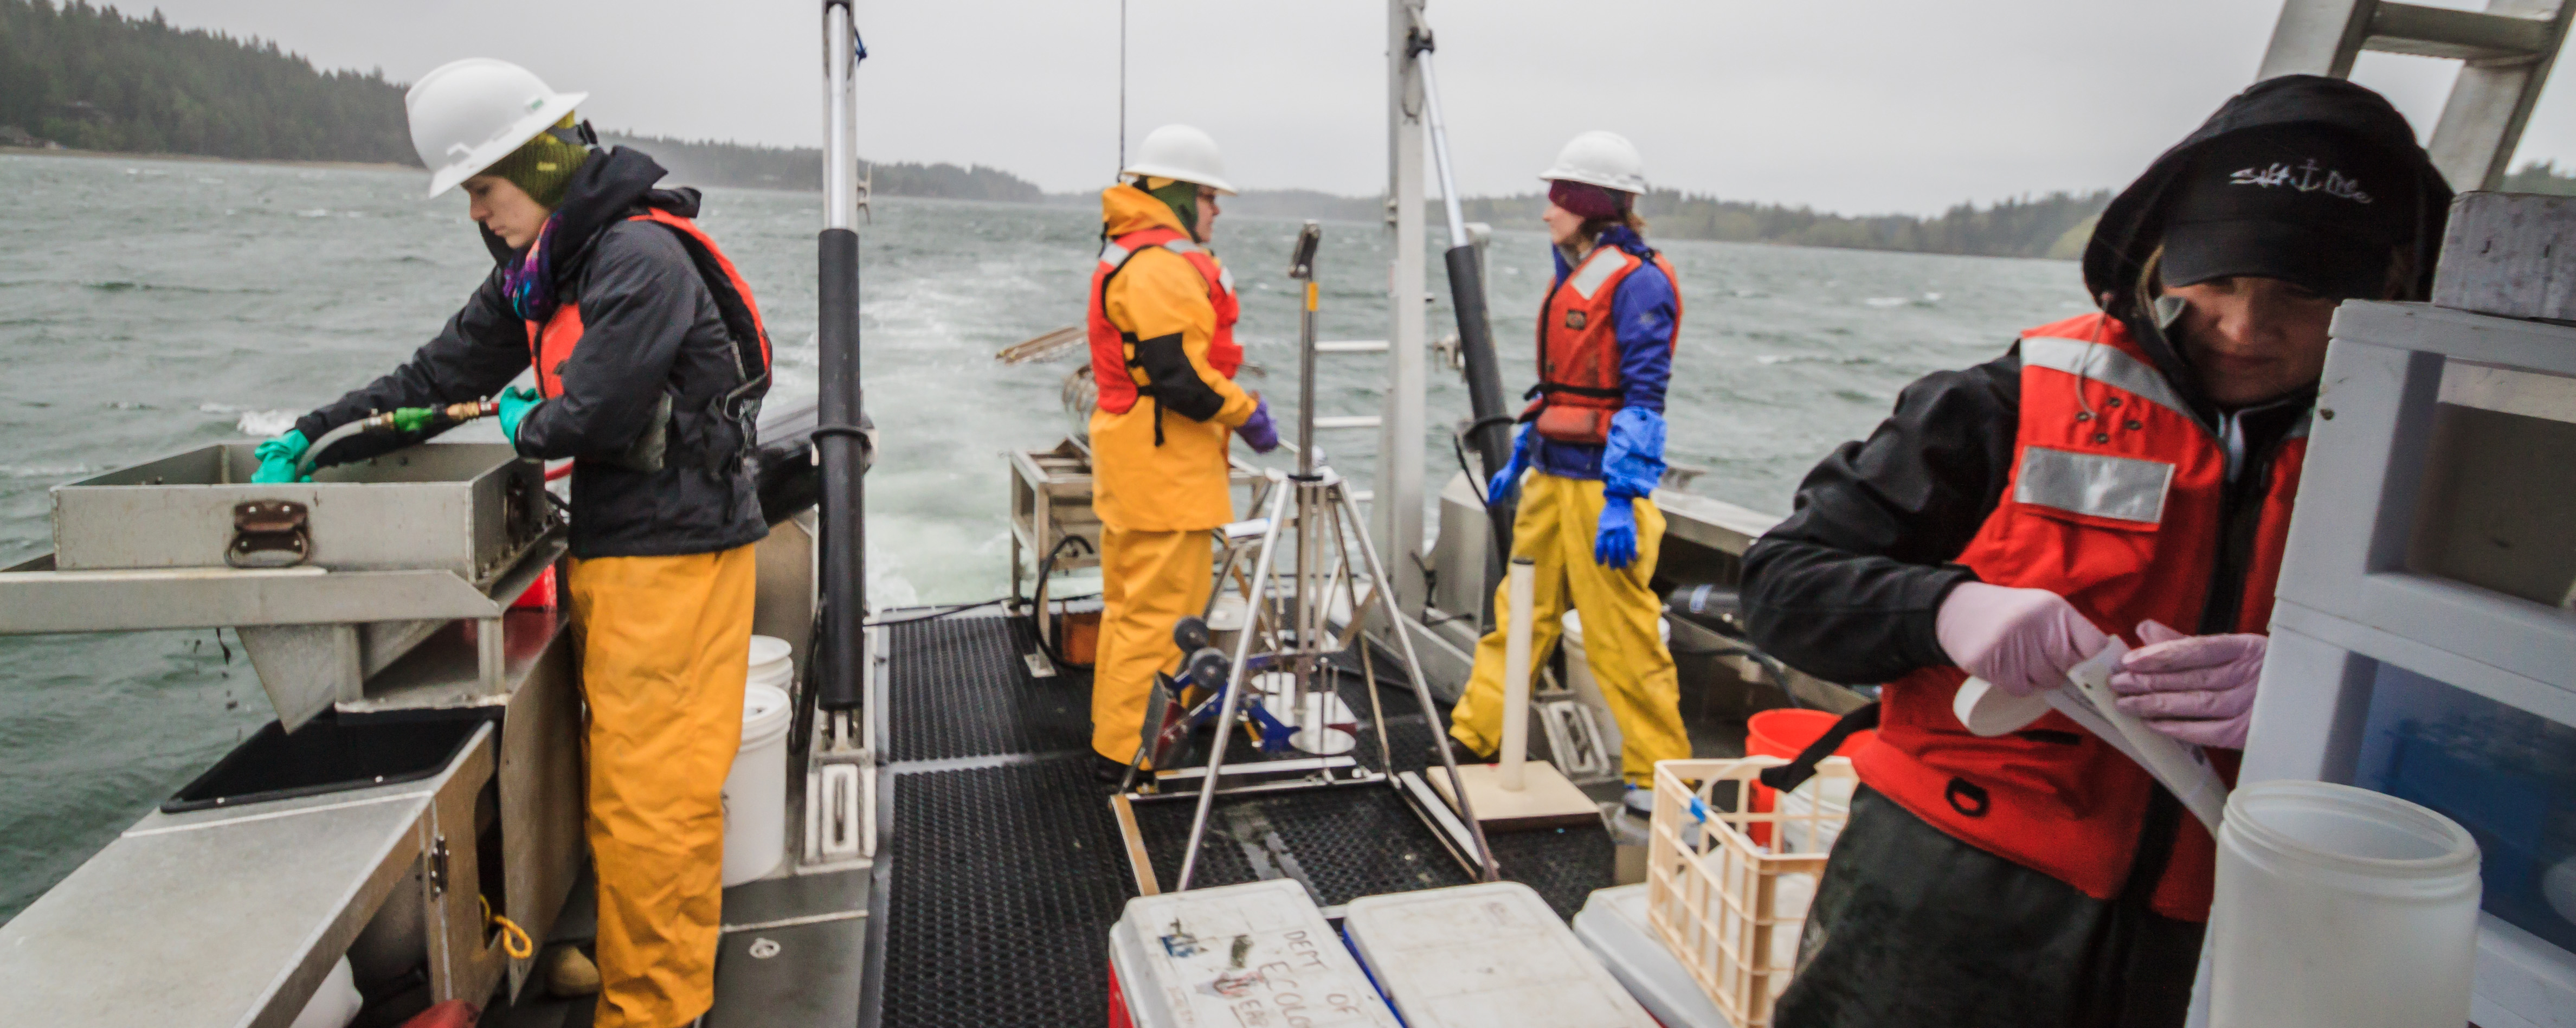 Four scientists in life jackets and rain suits work on the deck of a boat on a cloudy day on Puget Sound. One is washing sediment in a sieve with a hose and others are moving tubes full of sediment.  